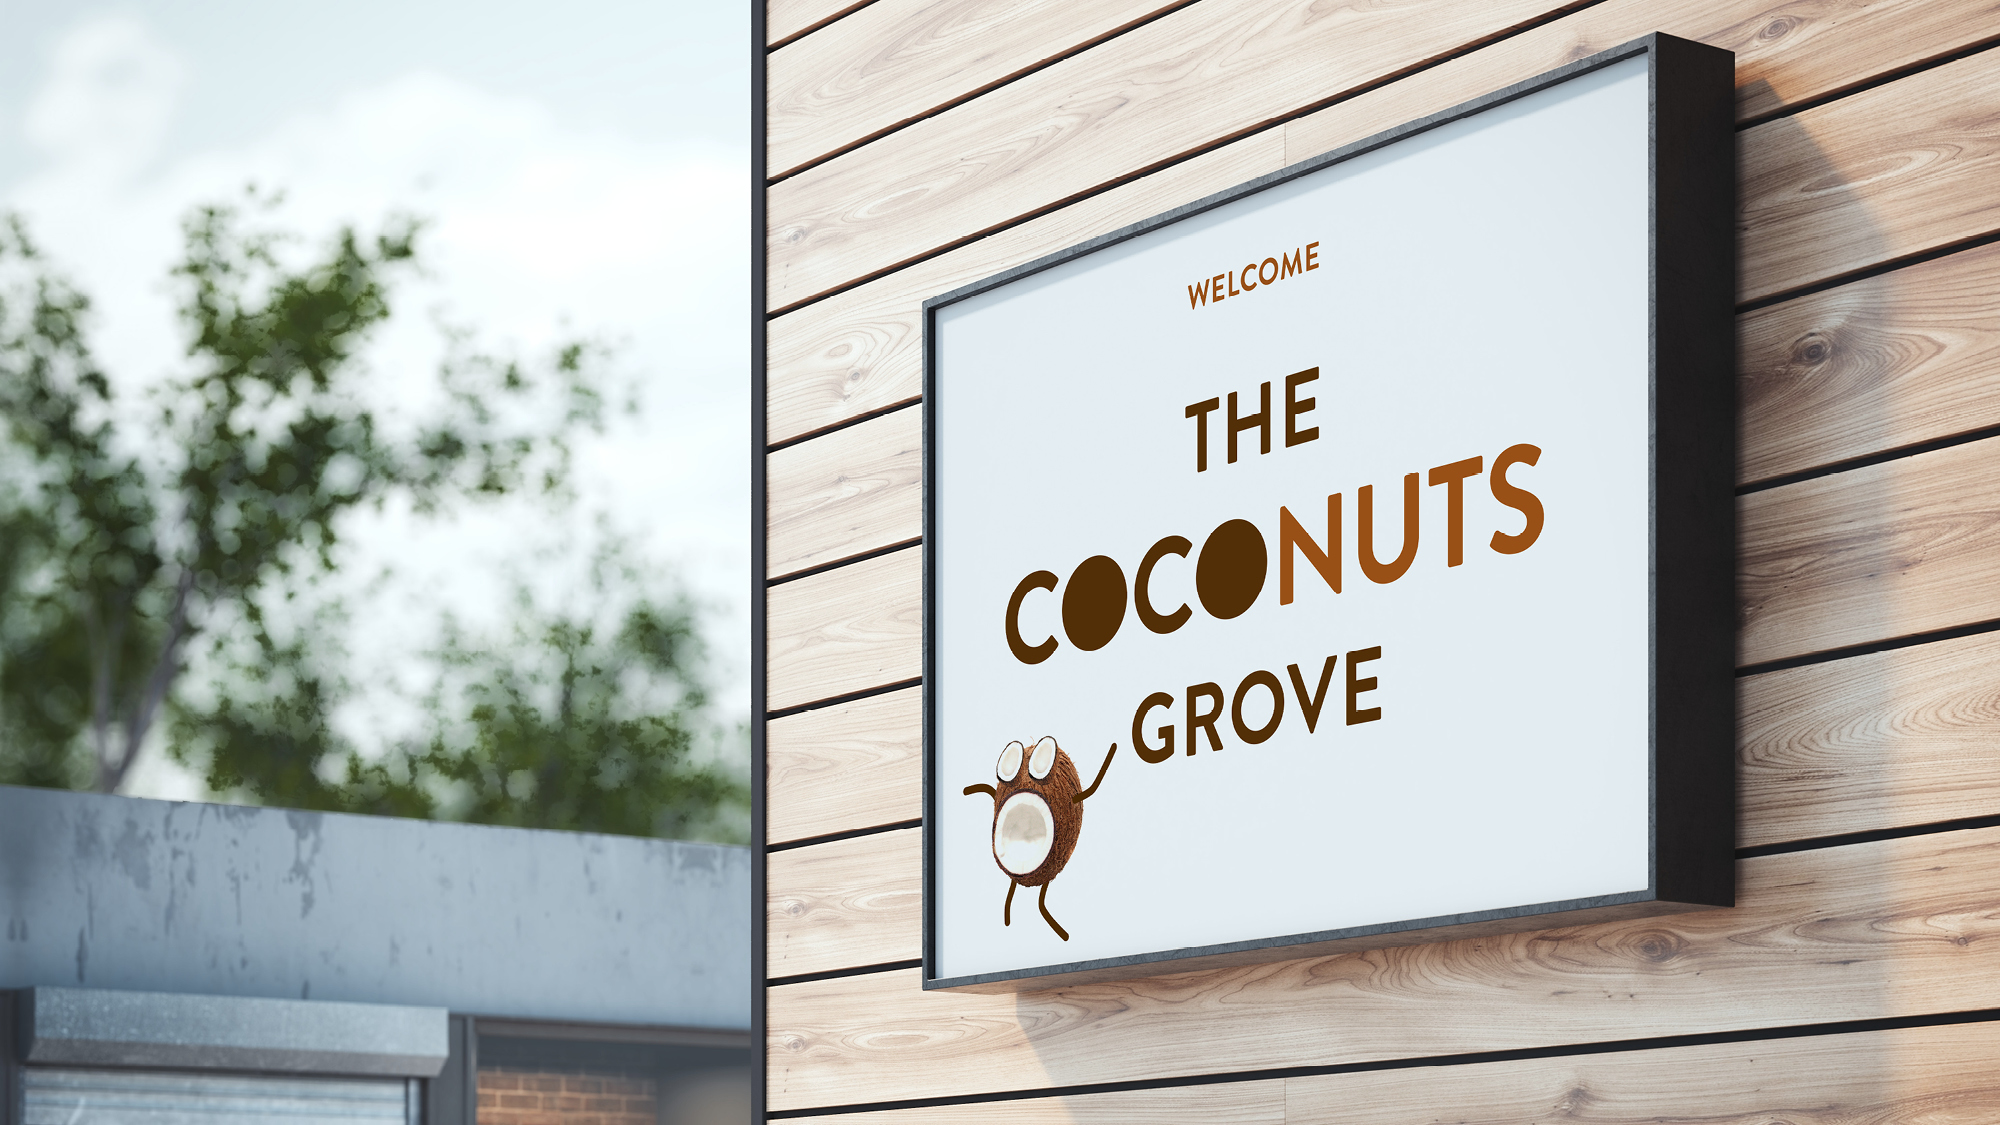 Entity-3-Three-Brand-Design-Agency-Sydney-CocoNuts-11-experience-signage-brand-voice